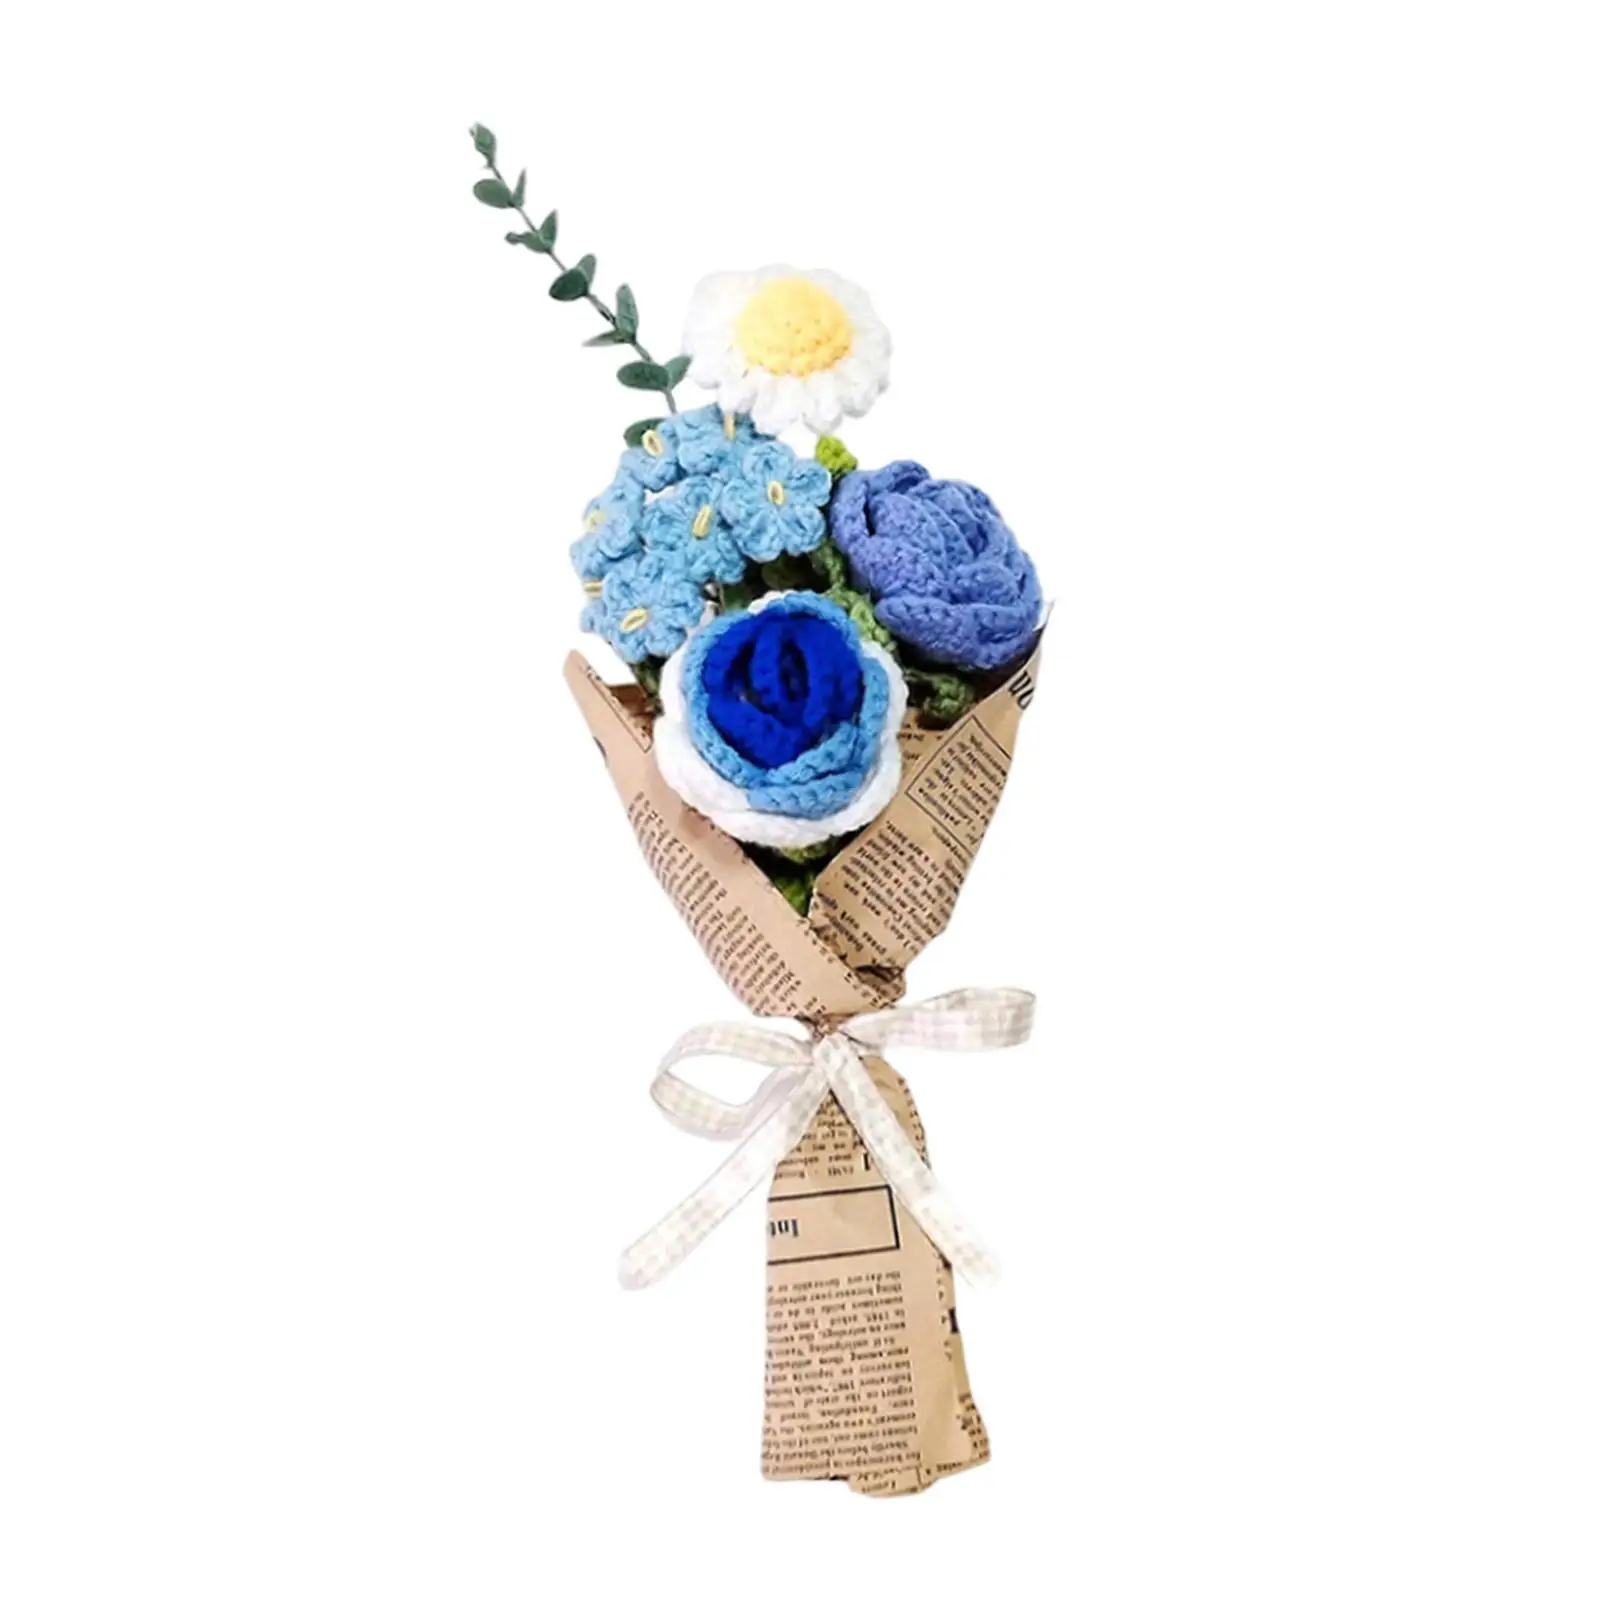 Crochet Flower Bouquet Home Decor Finished Product Crochet Bouquet by Professional Craftsmen for Family, Friends and Neighbors